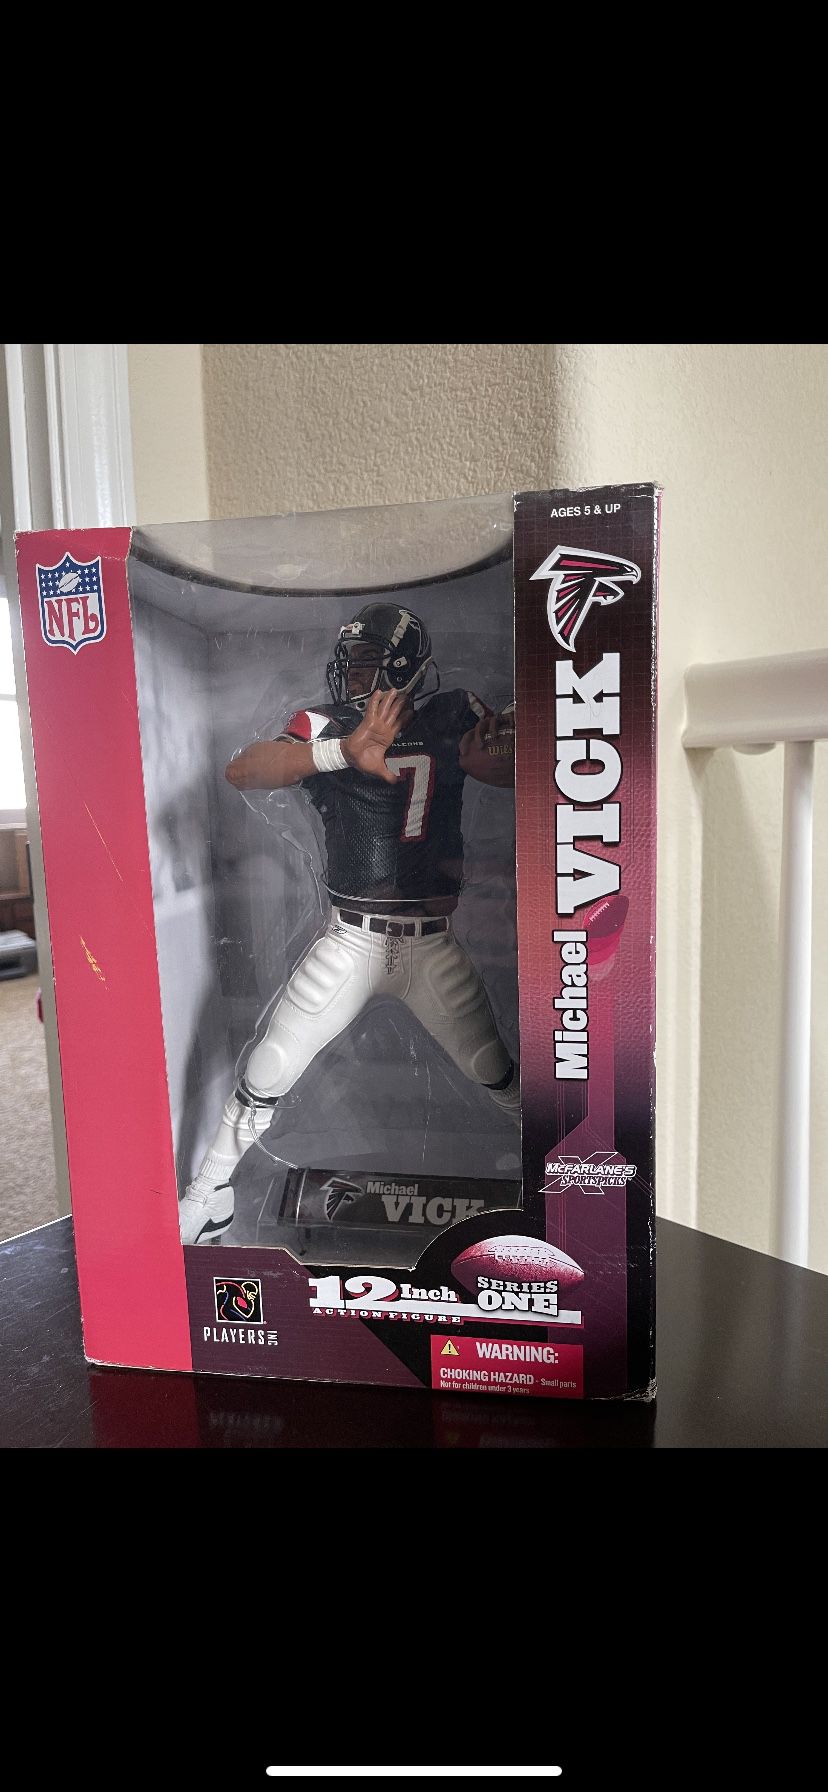 Micheal Vick Action Figure